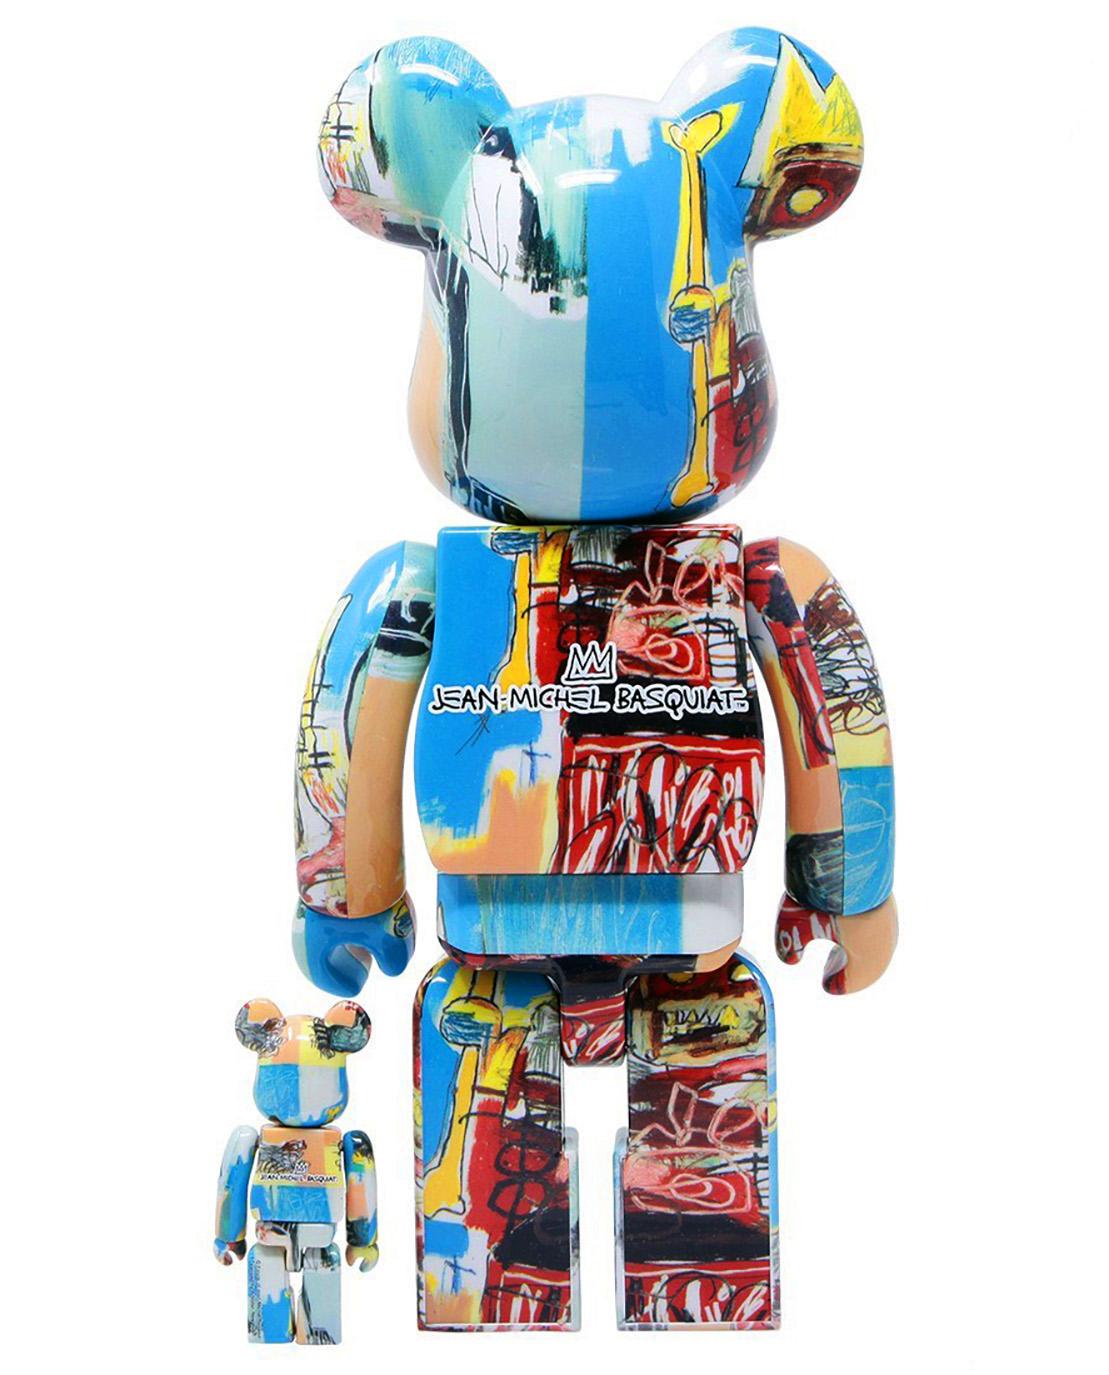 Bearbrick x Estate of Jean-Michel Basquiat and Bearbrick x Andy Warhol Foundation and Estate of Jean-Michel Basquiat Vinyl Figures: Set of two (400%):
A unique, timeless collectible trademarked & licensed by the estates of Jean-Michel Basquiat and